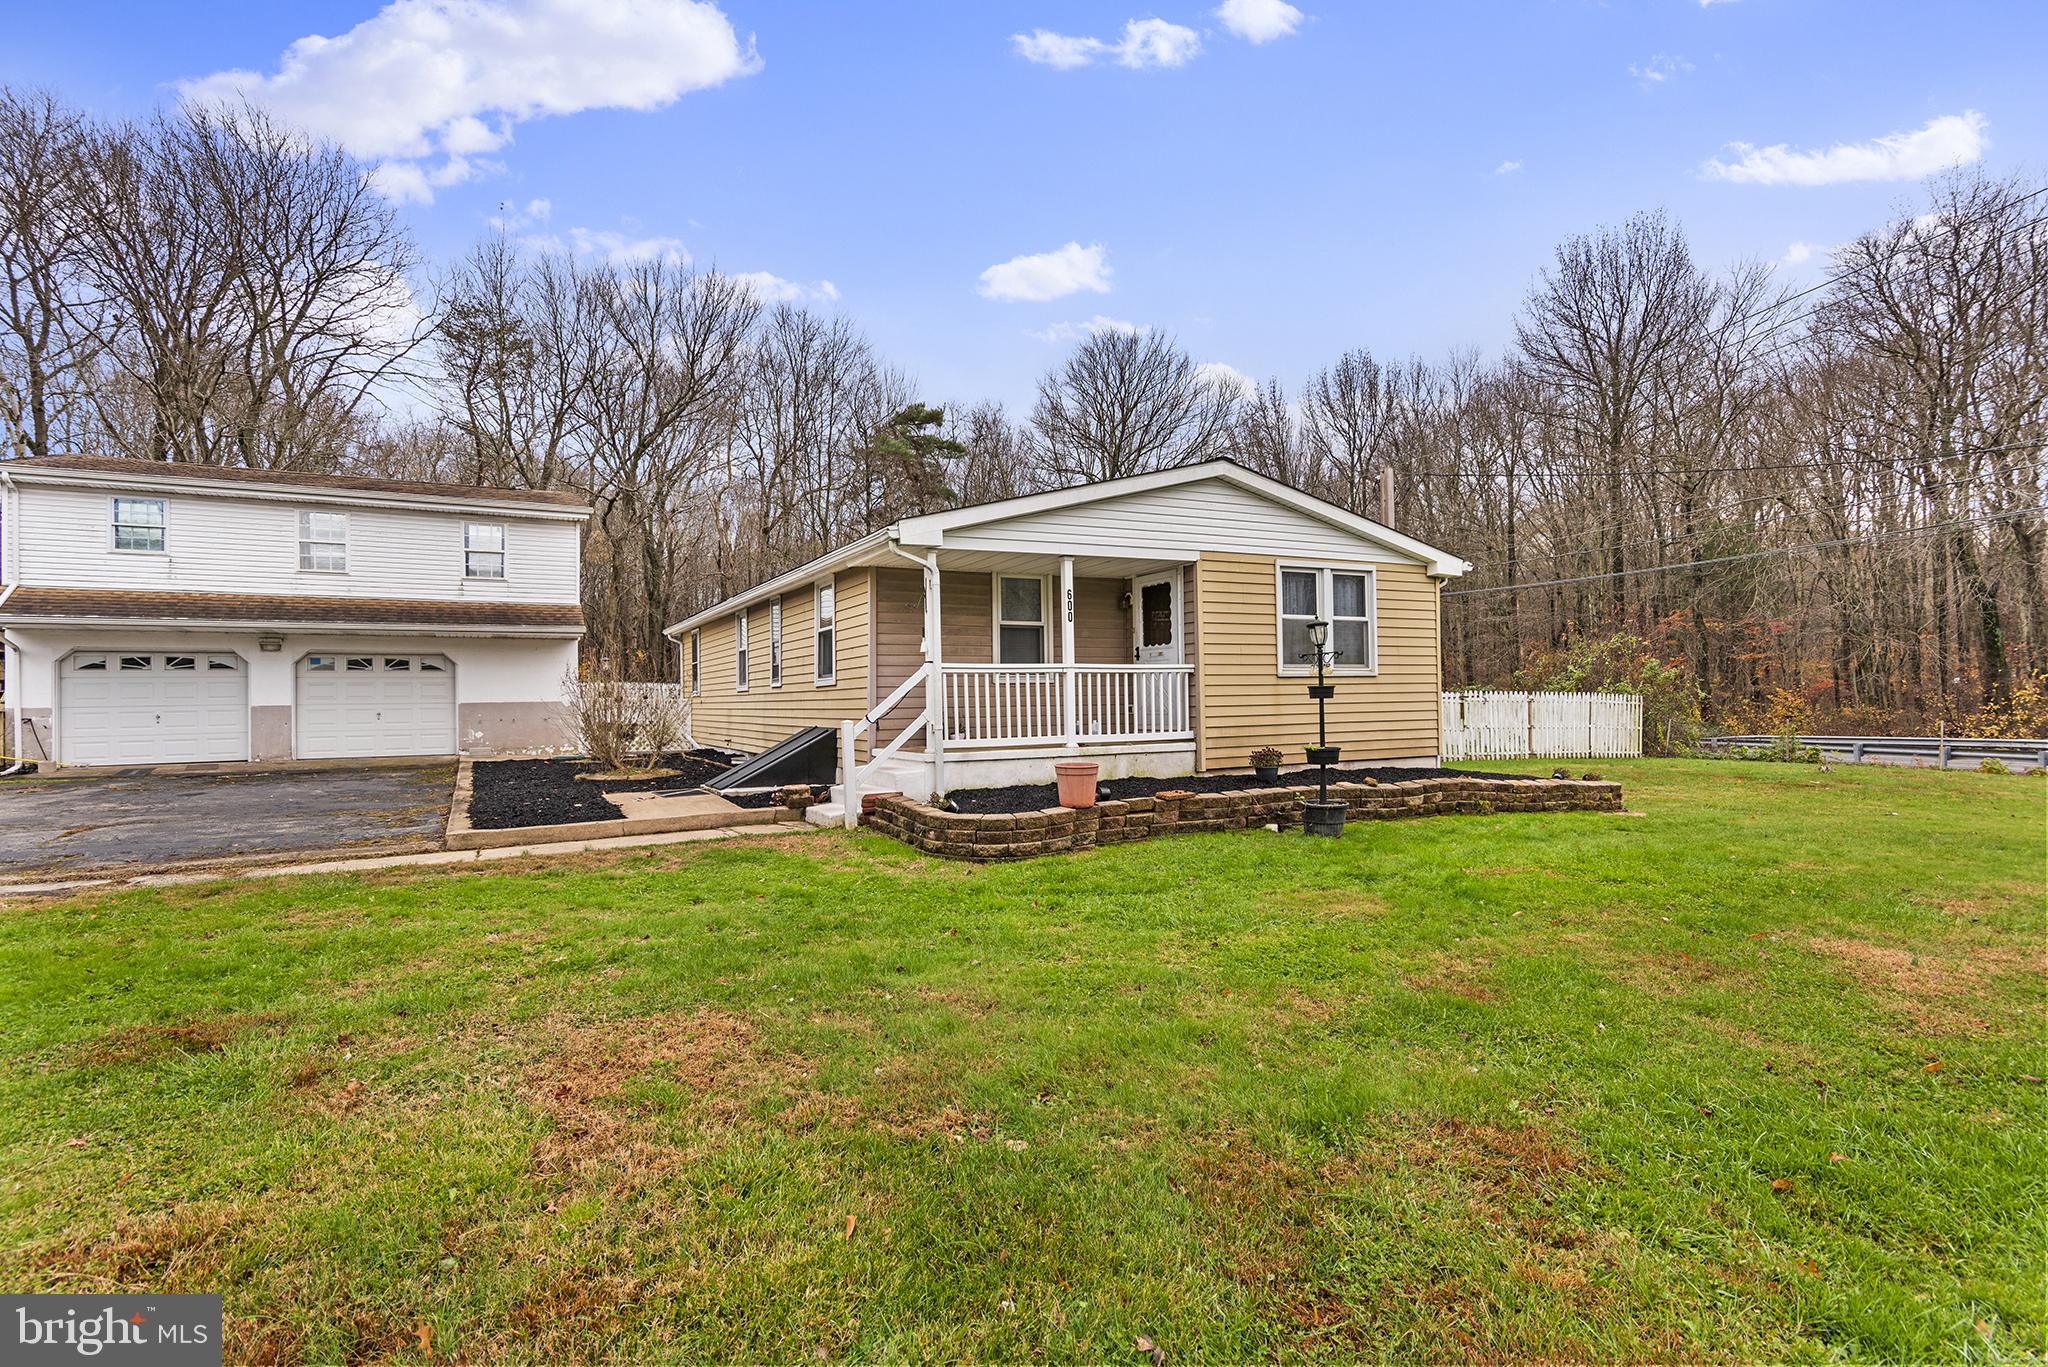 Welcome to this charming raised ranch/rambler style home in Elkton, MD! Boasting 4 bedrooms, 2 bathr